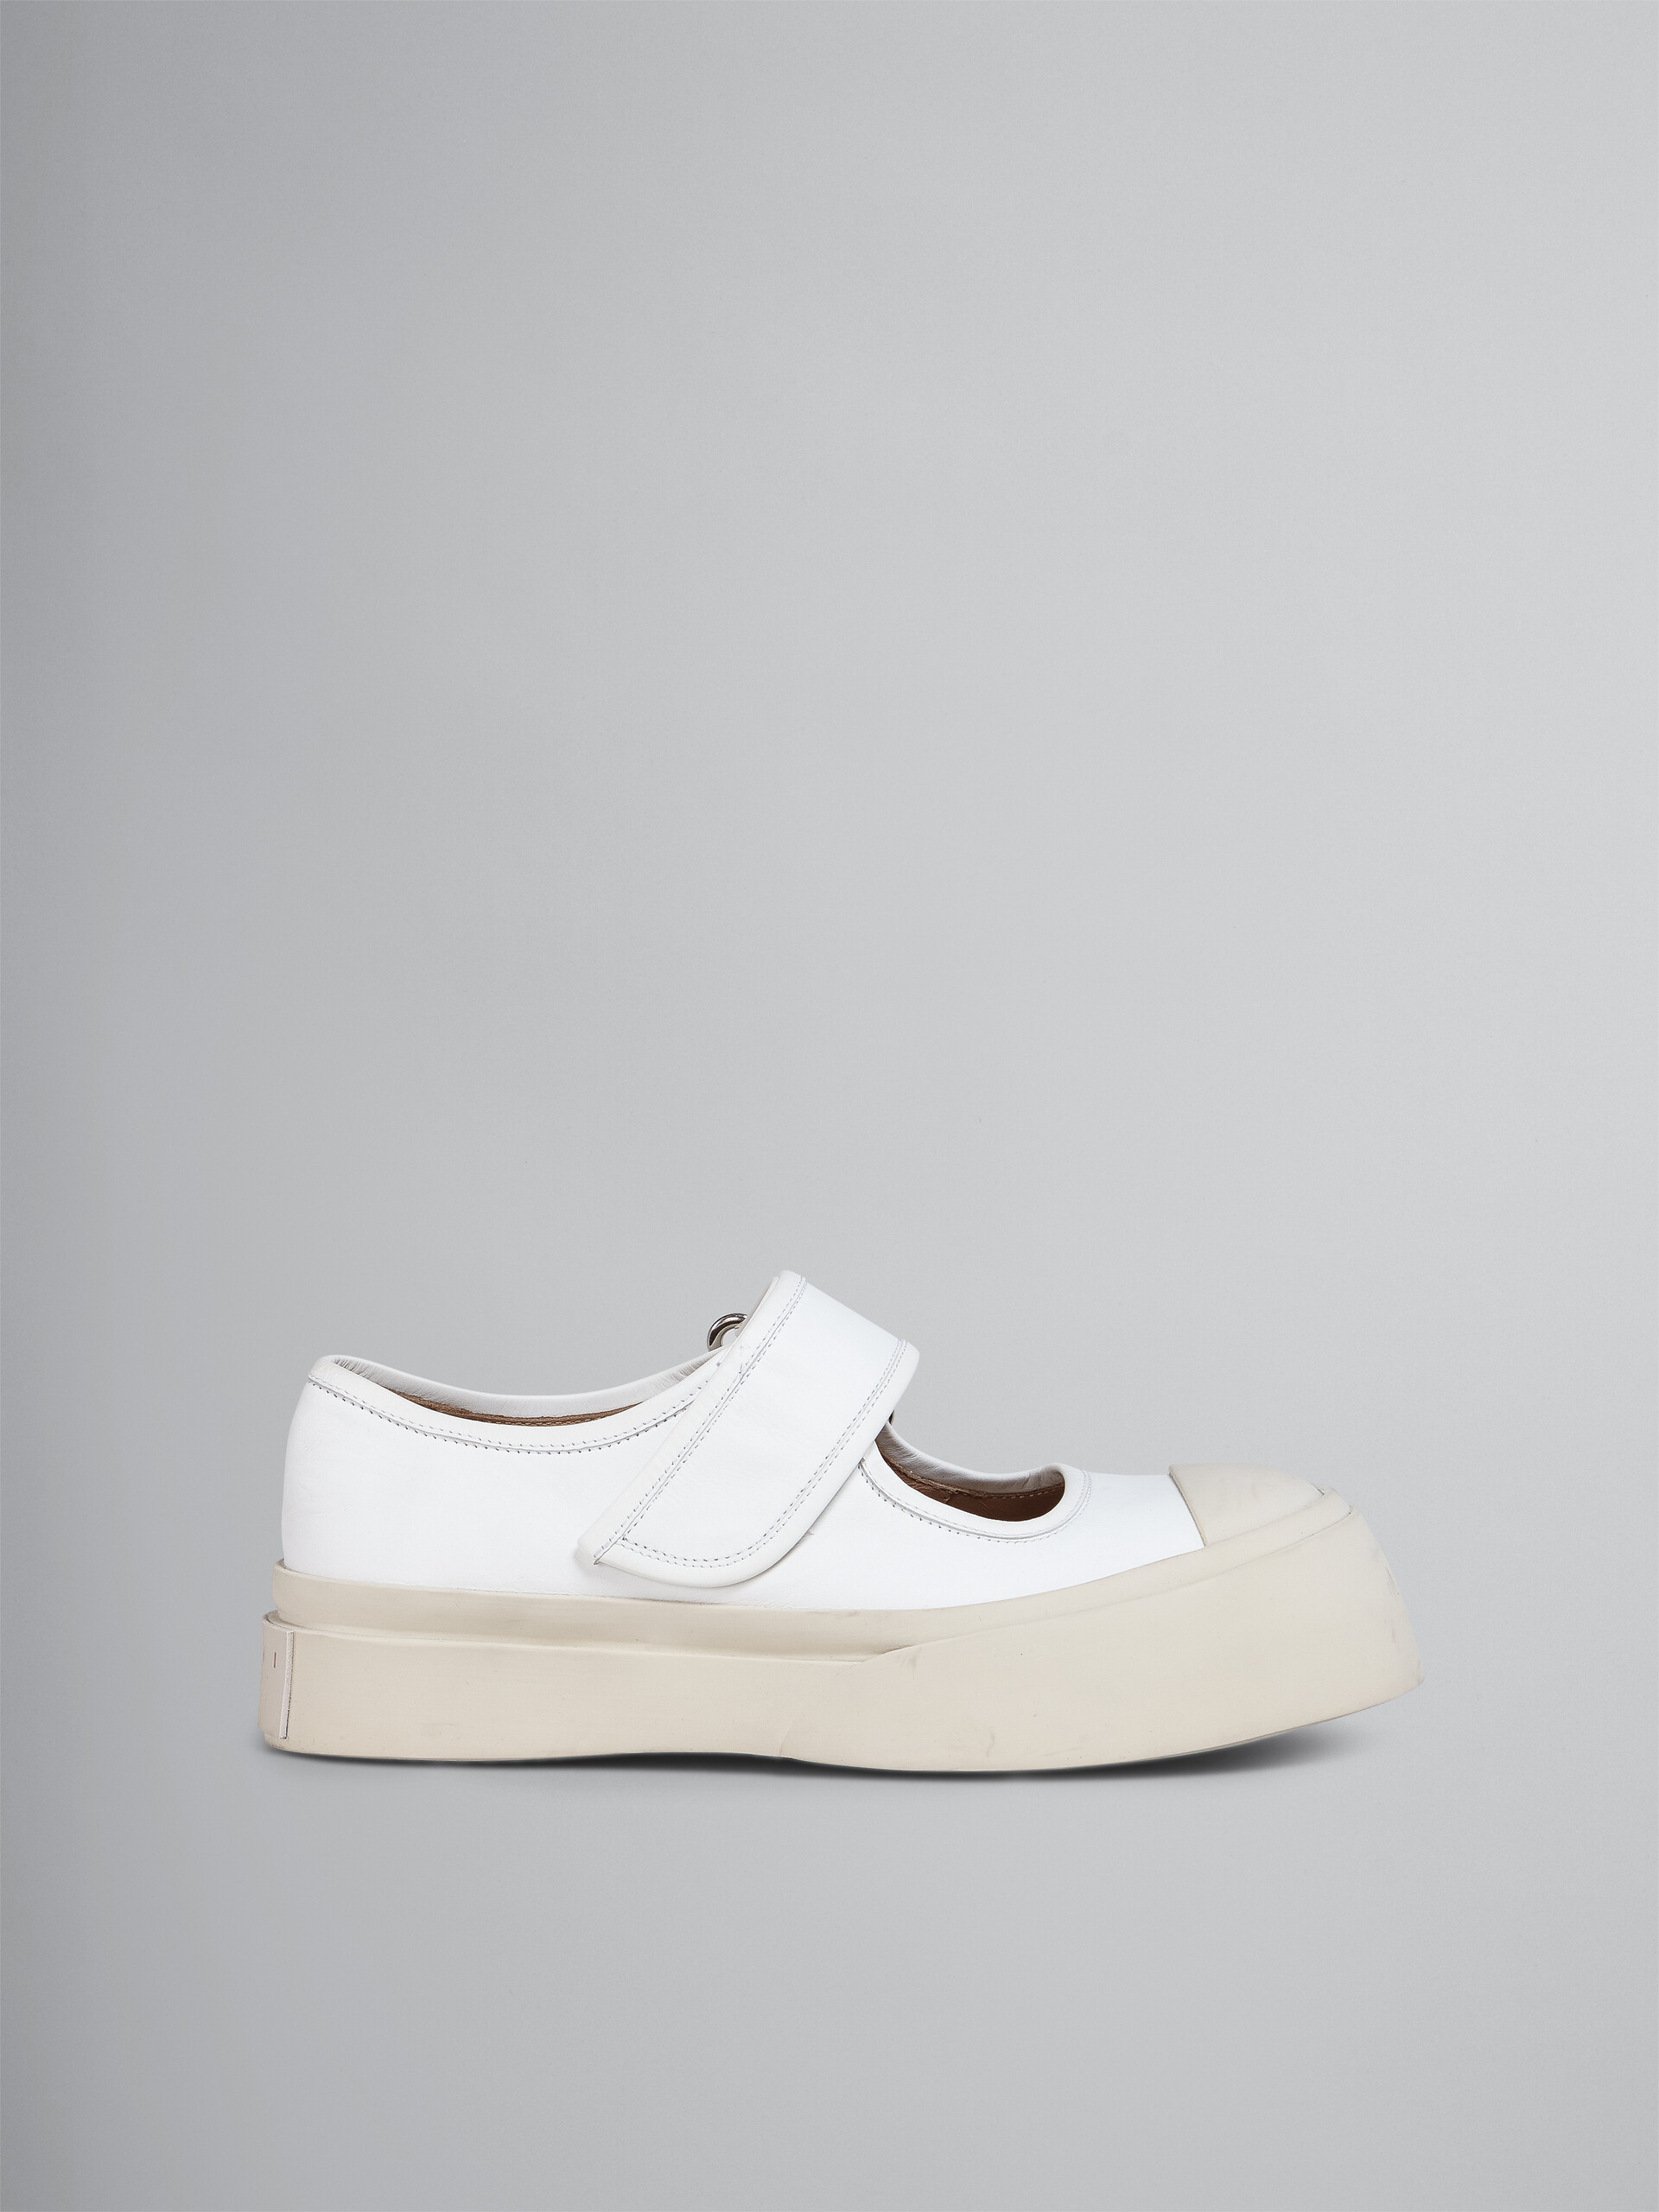 Calf leather PABLO Mary-Jane sneaker - Sneakers - Image 1